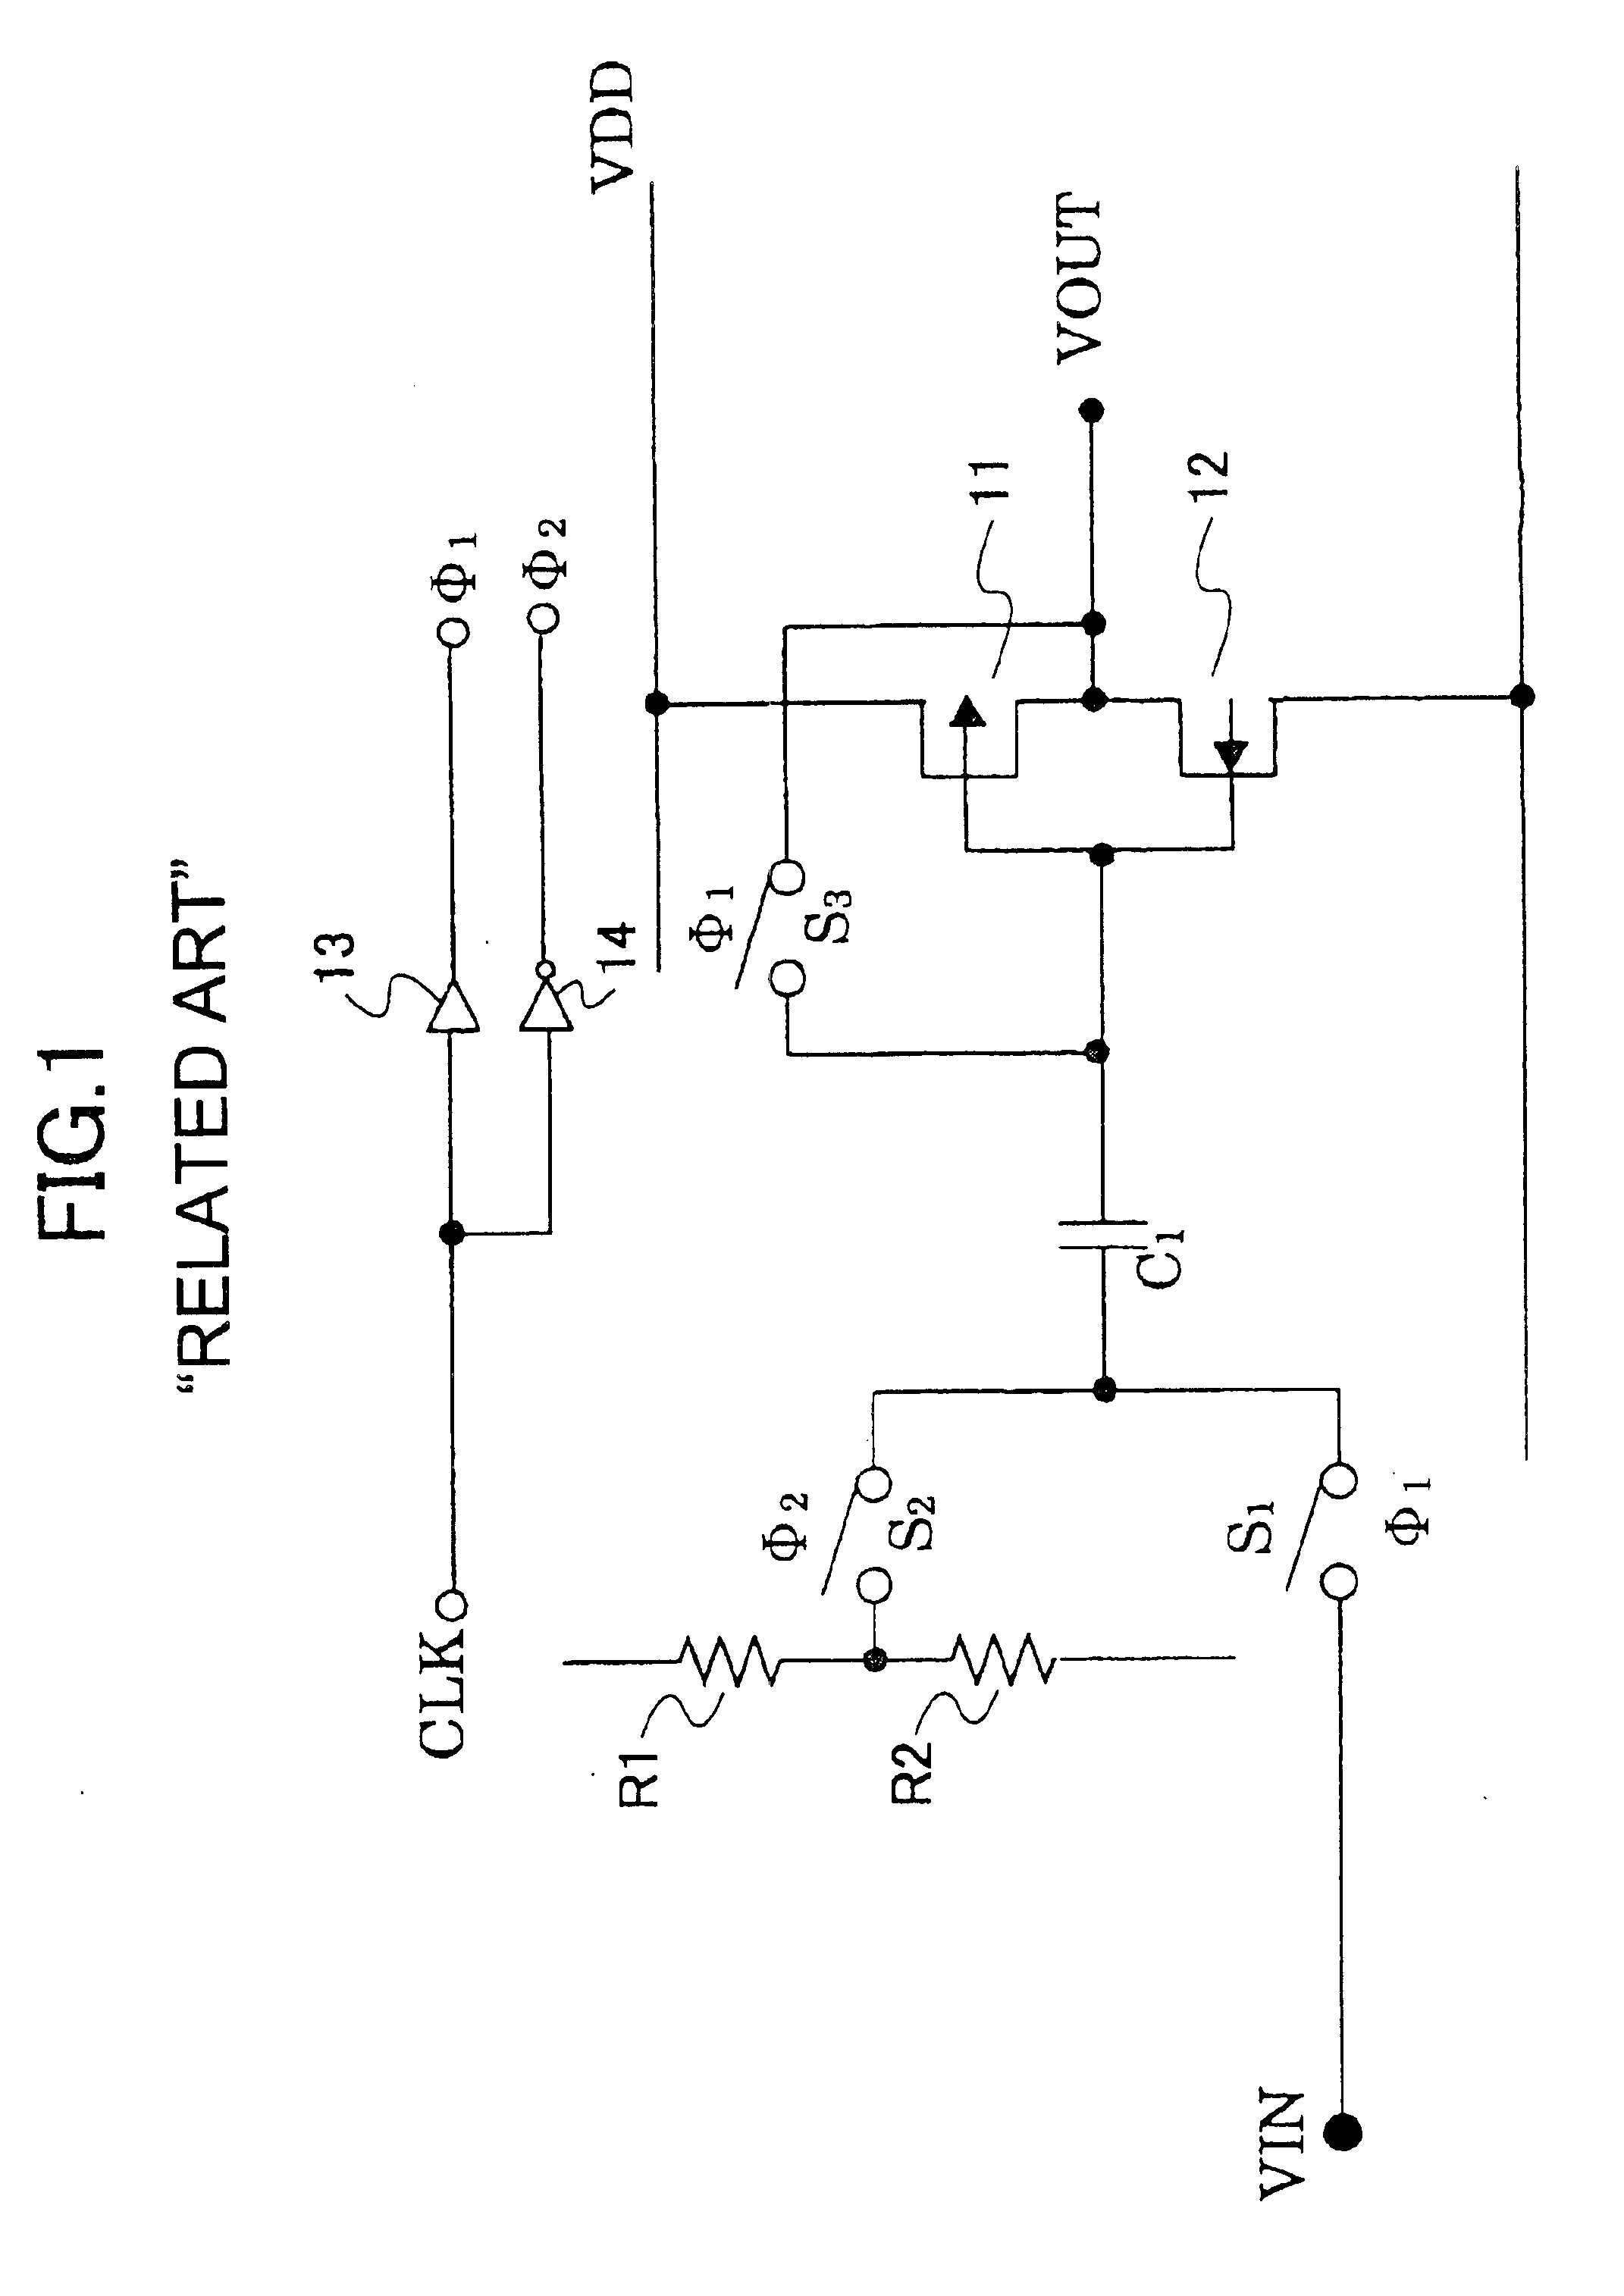 A/D converter with reduced power consumption